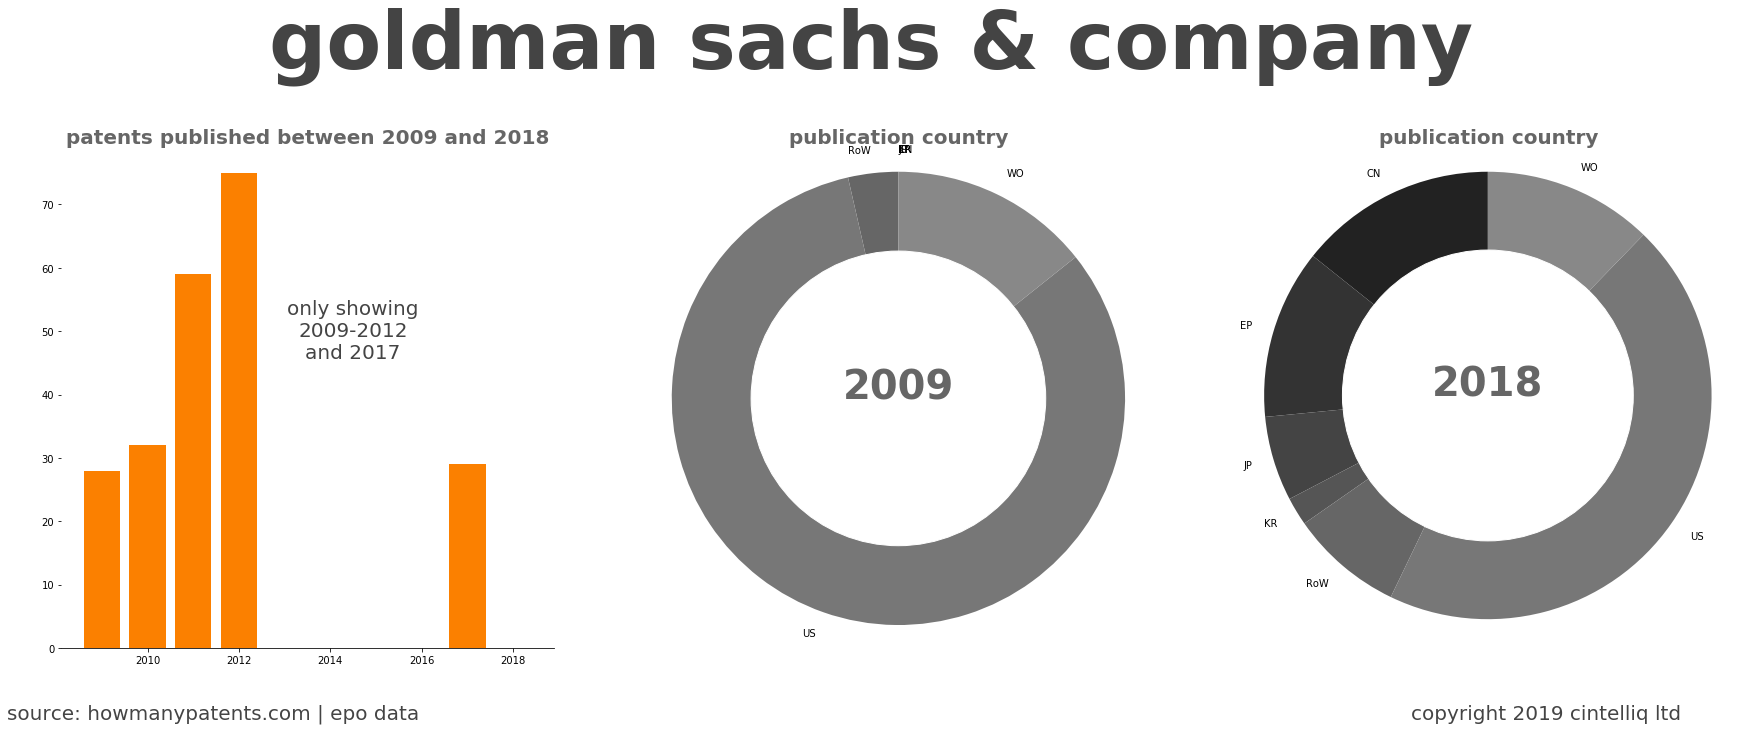 summary of patents for Goldman Sachs & Company